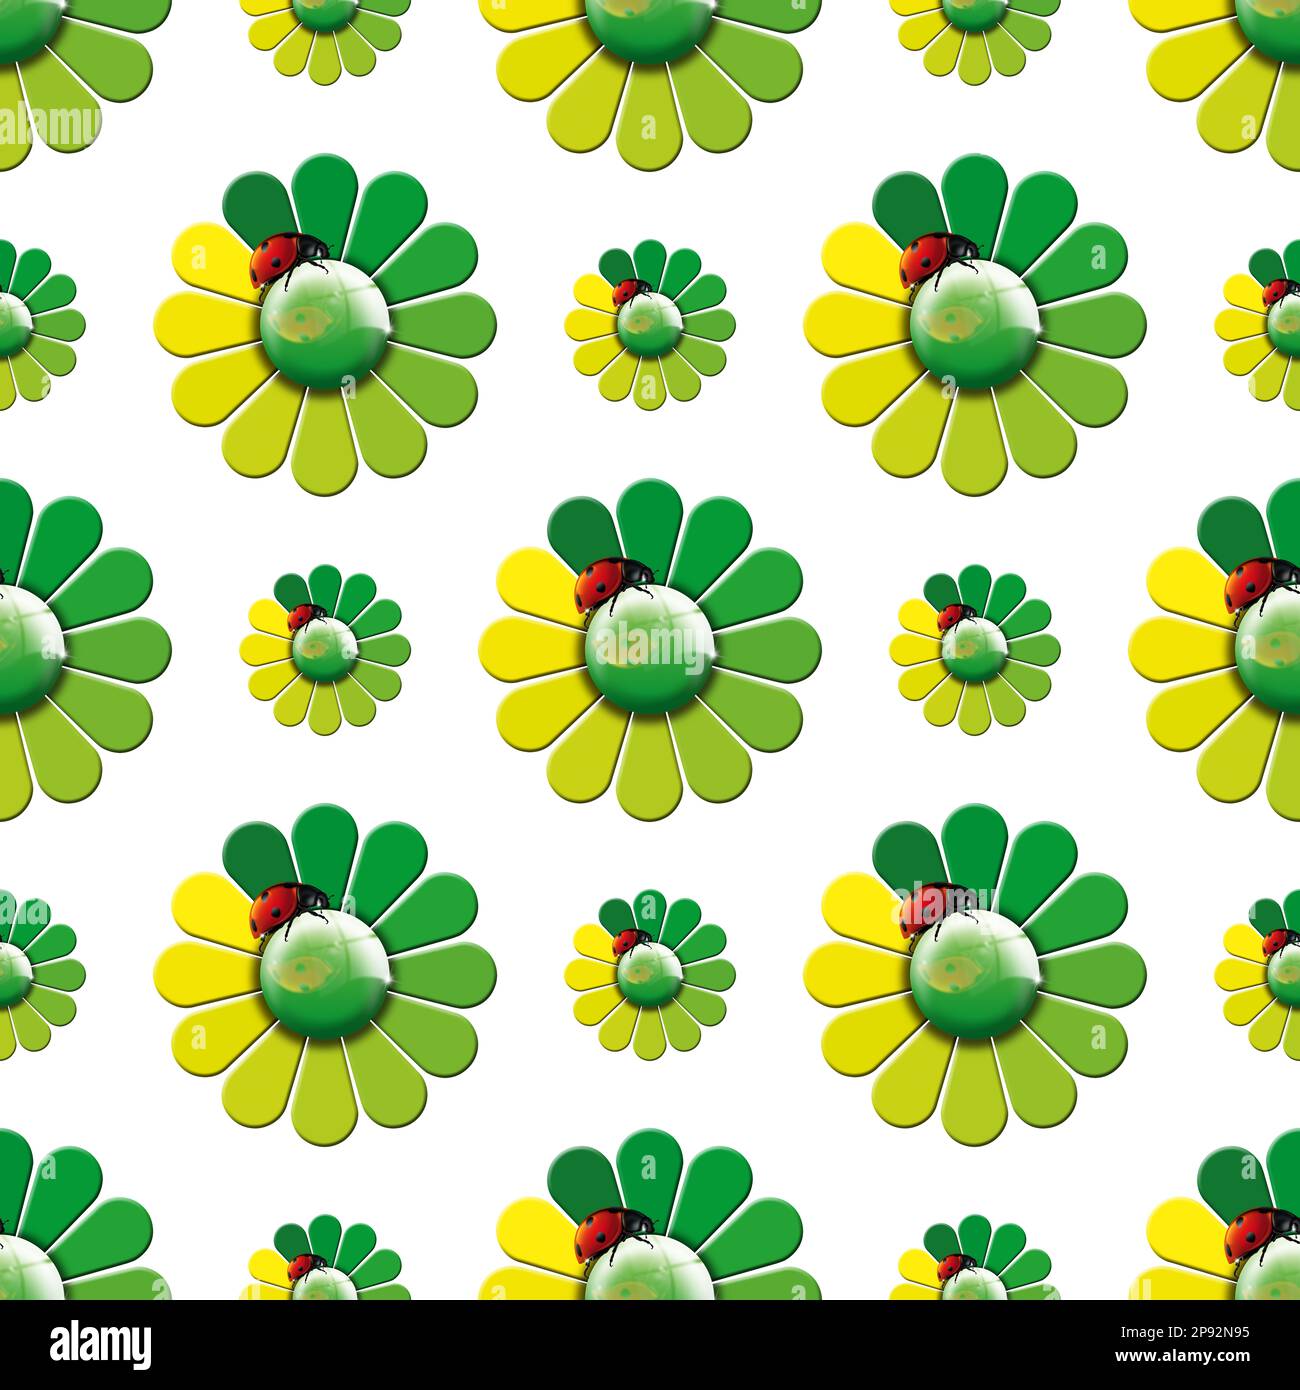 Seamless pattern with green and yellow flowers and ladybugs, isolated on white background. 3D illustration. Stock Photo